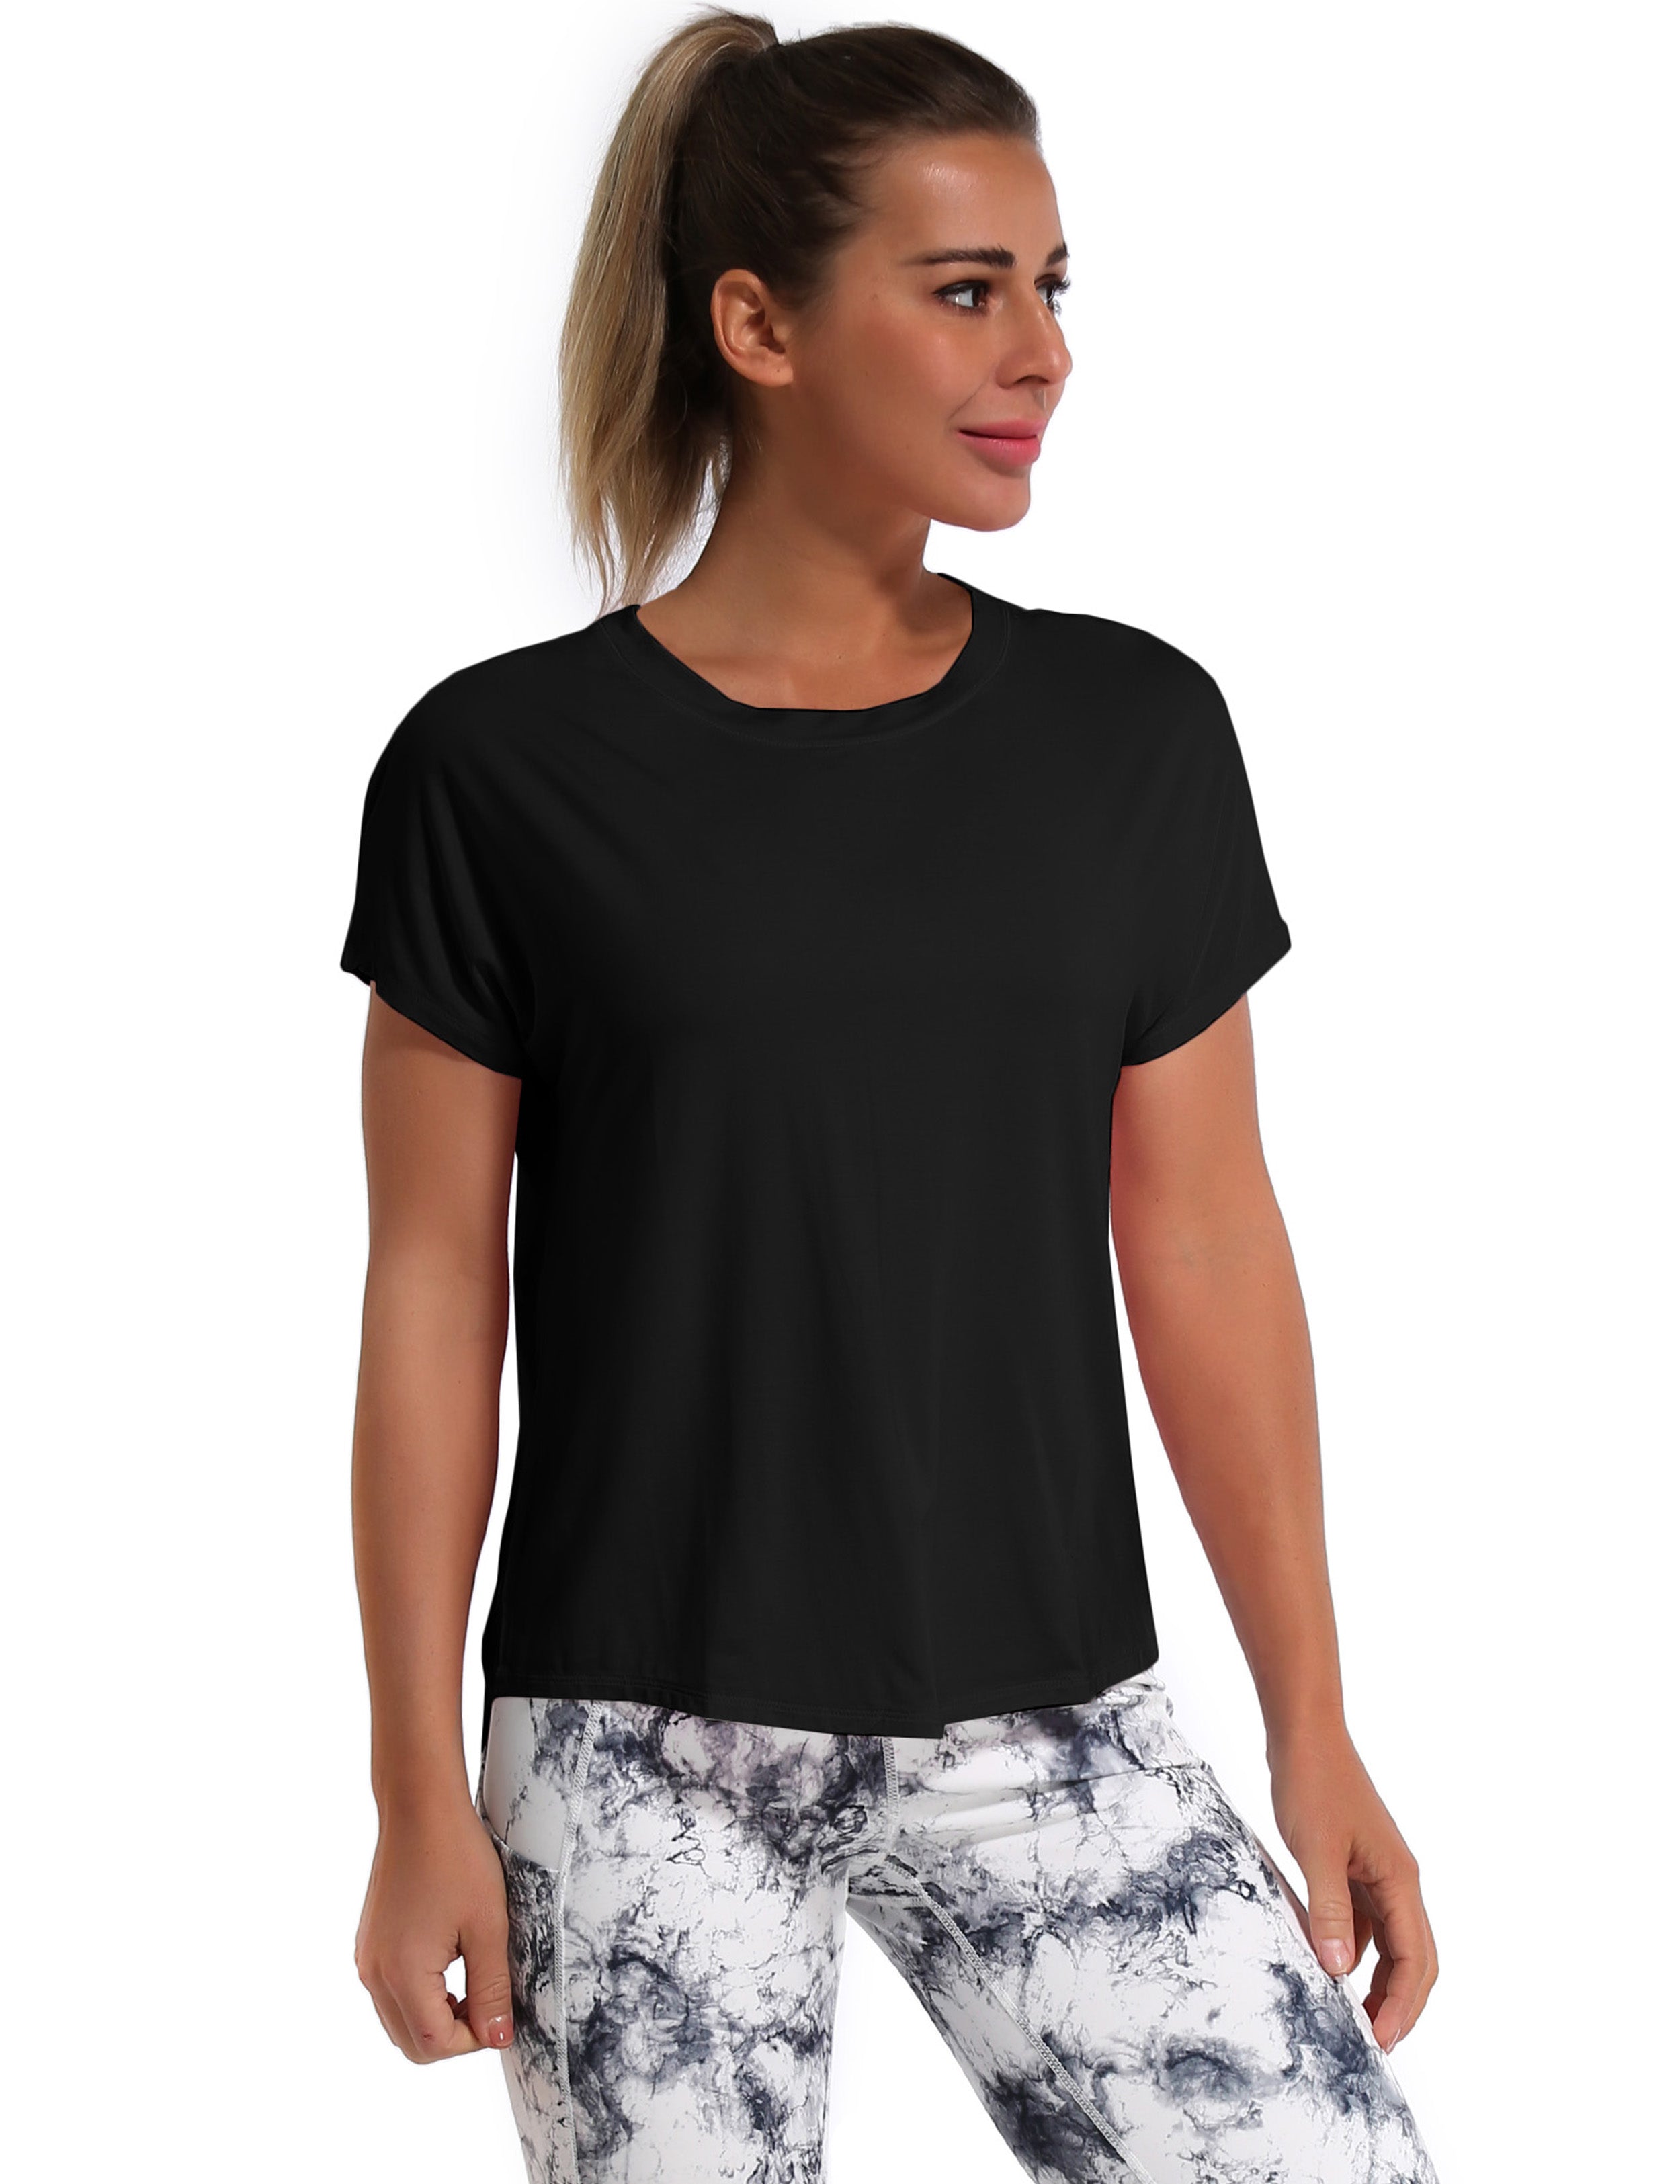 Hip Length Short Sleeve Shirt black 93%Modal/7%Spandex Designed for Pilates Classic Fit, Hip Length An easy fit that floats away from your body Sits below the waistband for moderate, everyday coverage Lightweight, elastic, strong fabric for moisture absorption and perspiration, sports and fitness clothing.